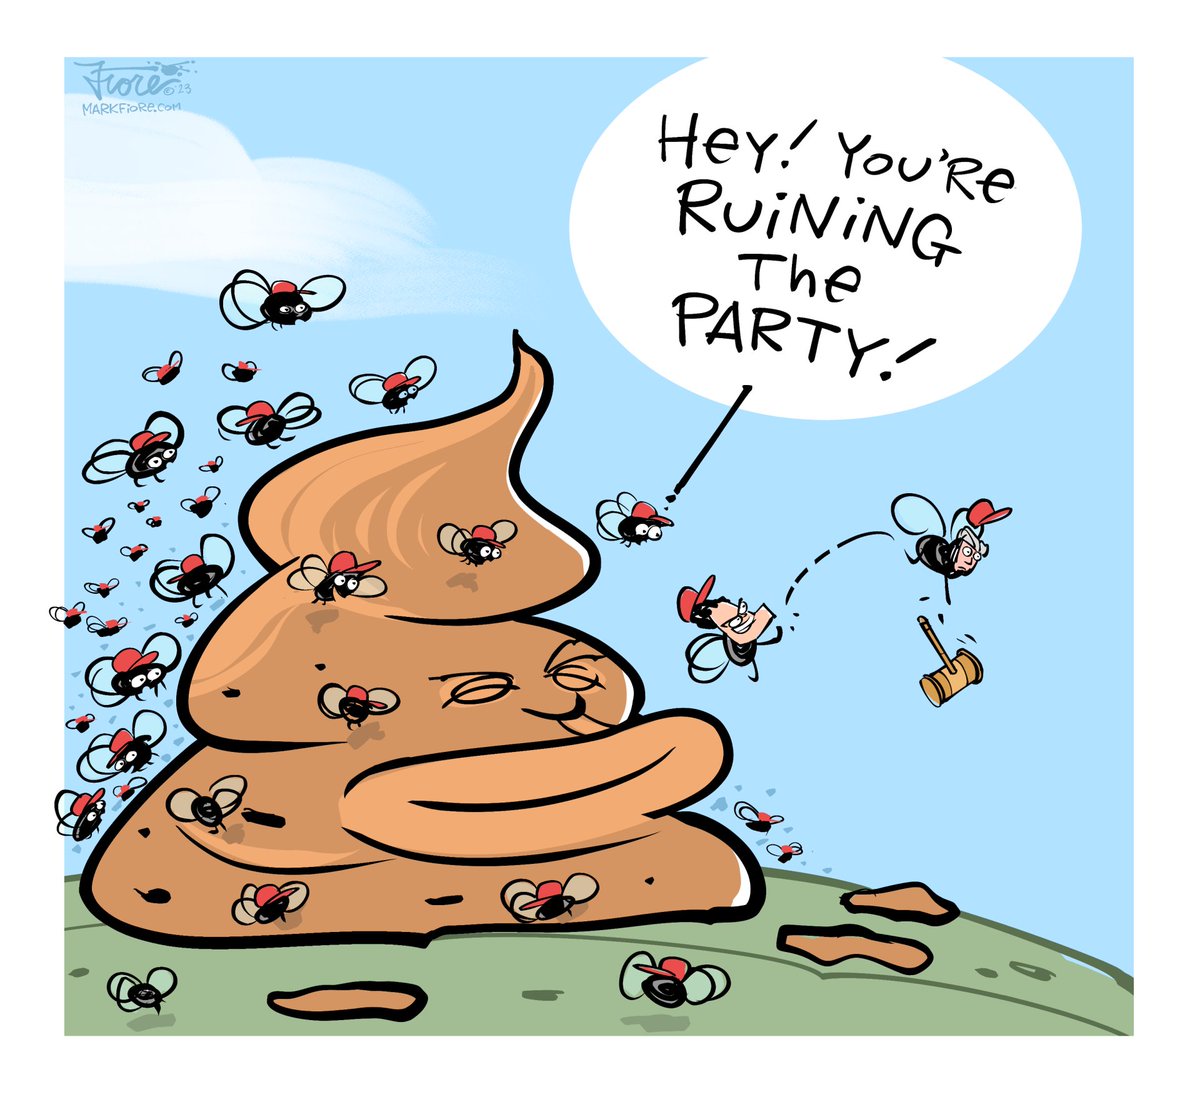 That extremist firebrand @mattgaetz is sure ruining the Republican Party, right? (More here markfiore.com ) #Gaetz #McCarthy #McCarthyOUT #RepublicansInDisarray #RepublicanParty #Congress #cartoons